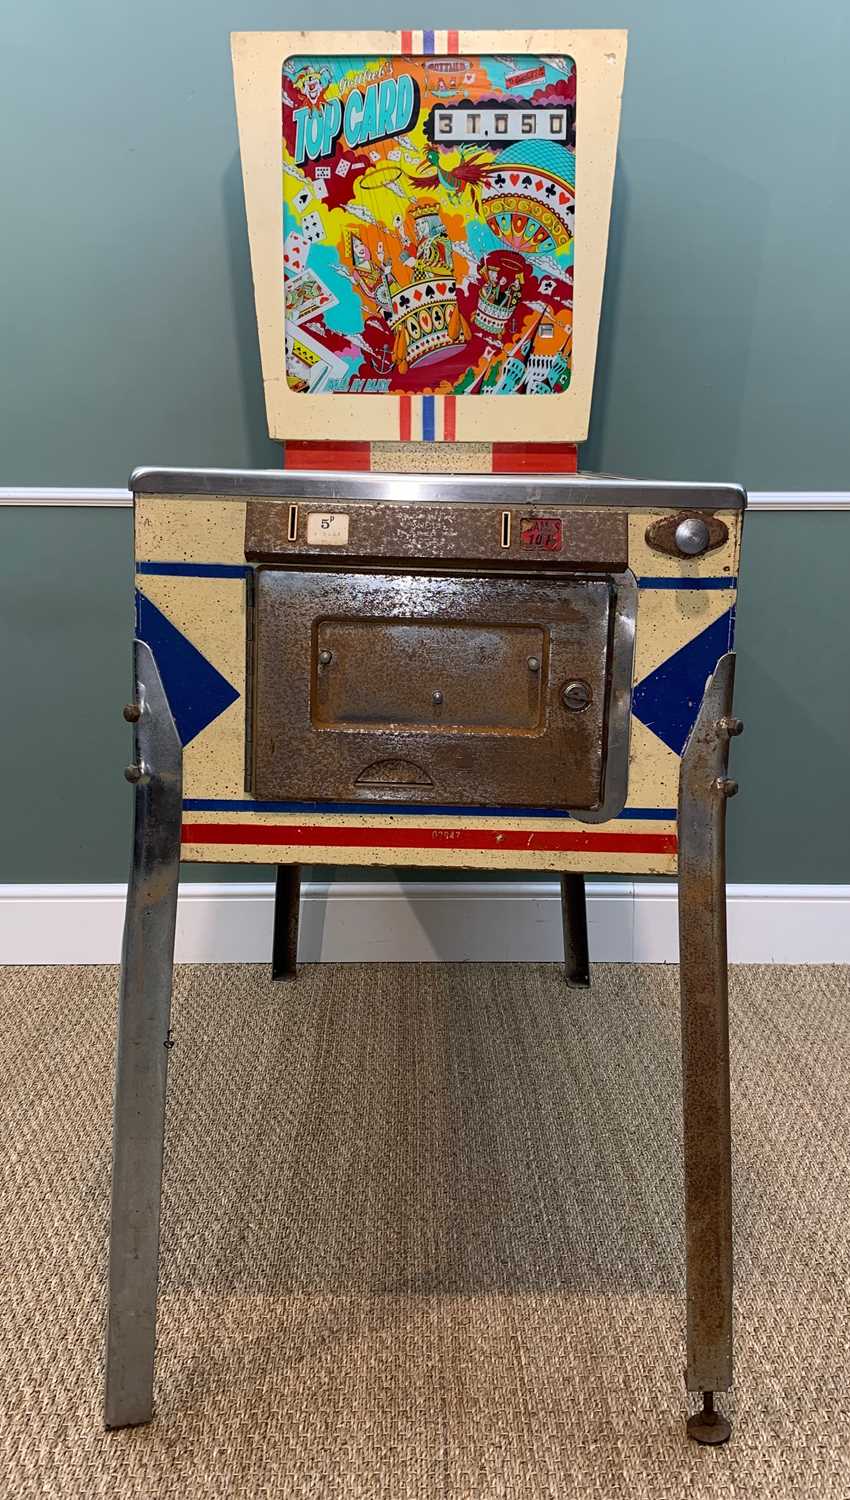 VINTAGE AMERICAN D. GOTTLIEB & Co.'TOPCARD' SINGLE PLAYER PINBALL MACHINE, c.1974. Comments: - Image 5 of 14